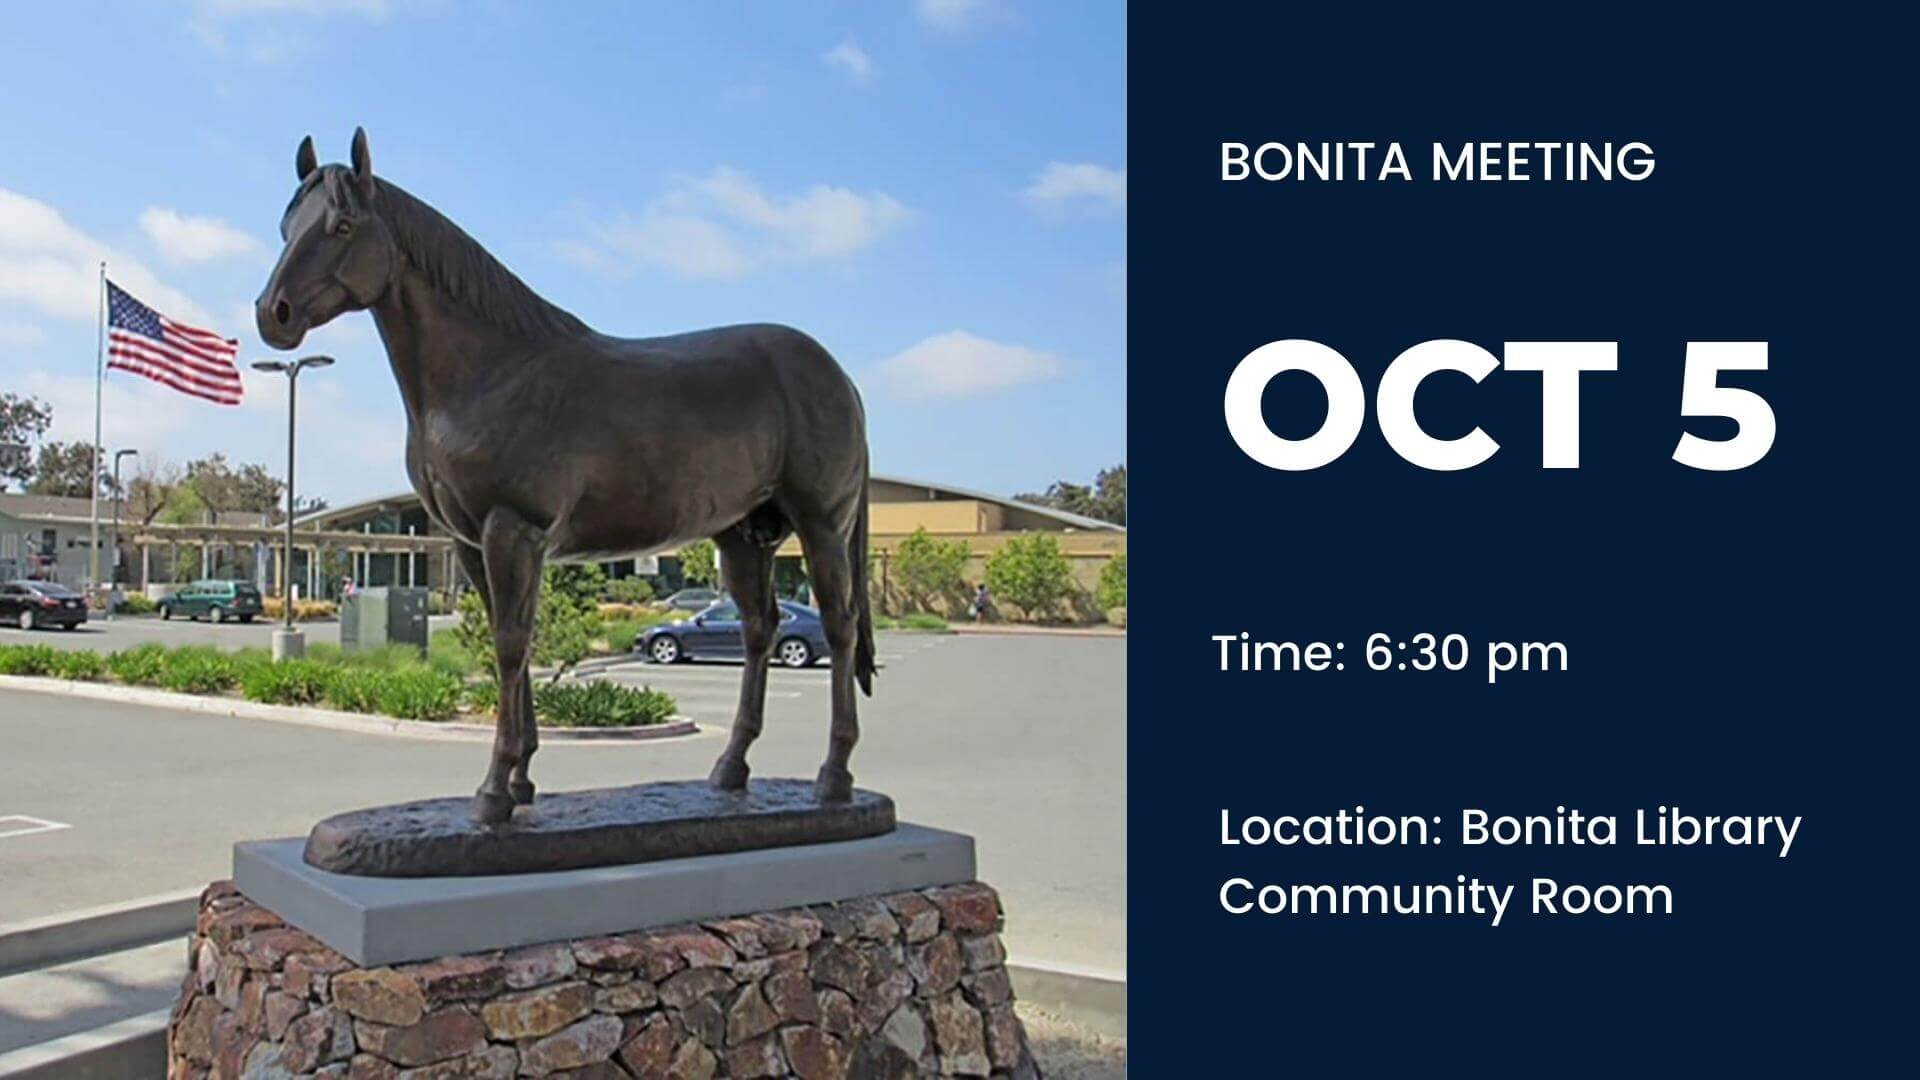 Please join the SVCA for their upcoming October 5th meeting to discuss news and important information on community topics. Read more.